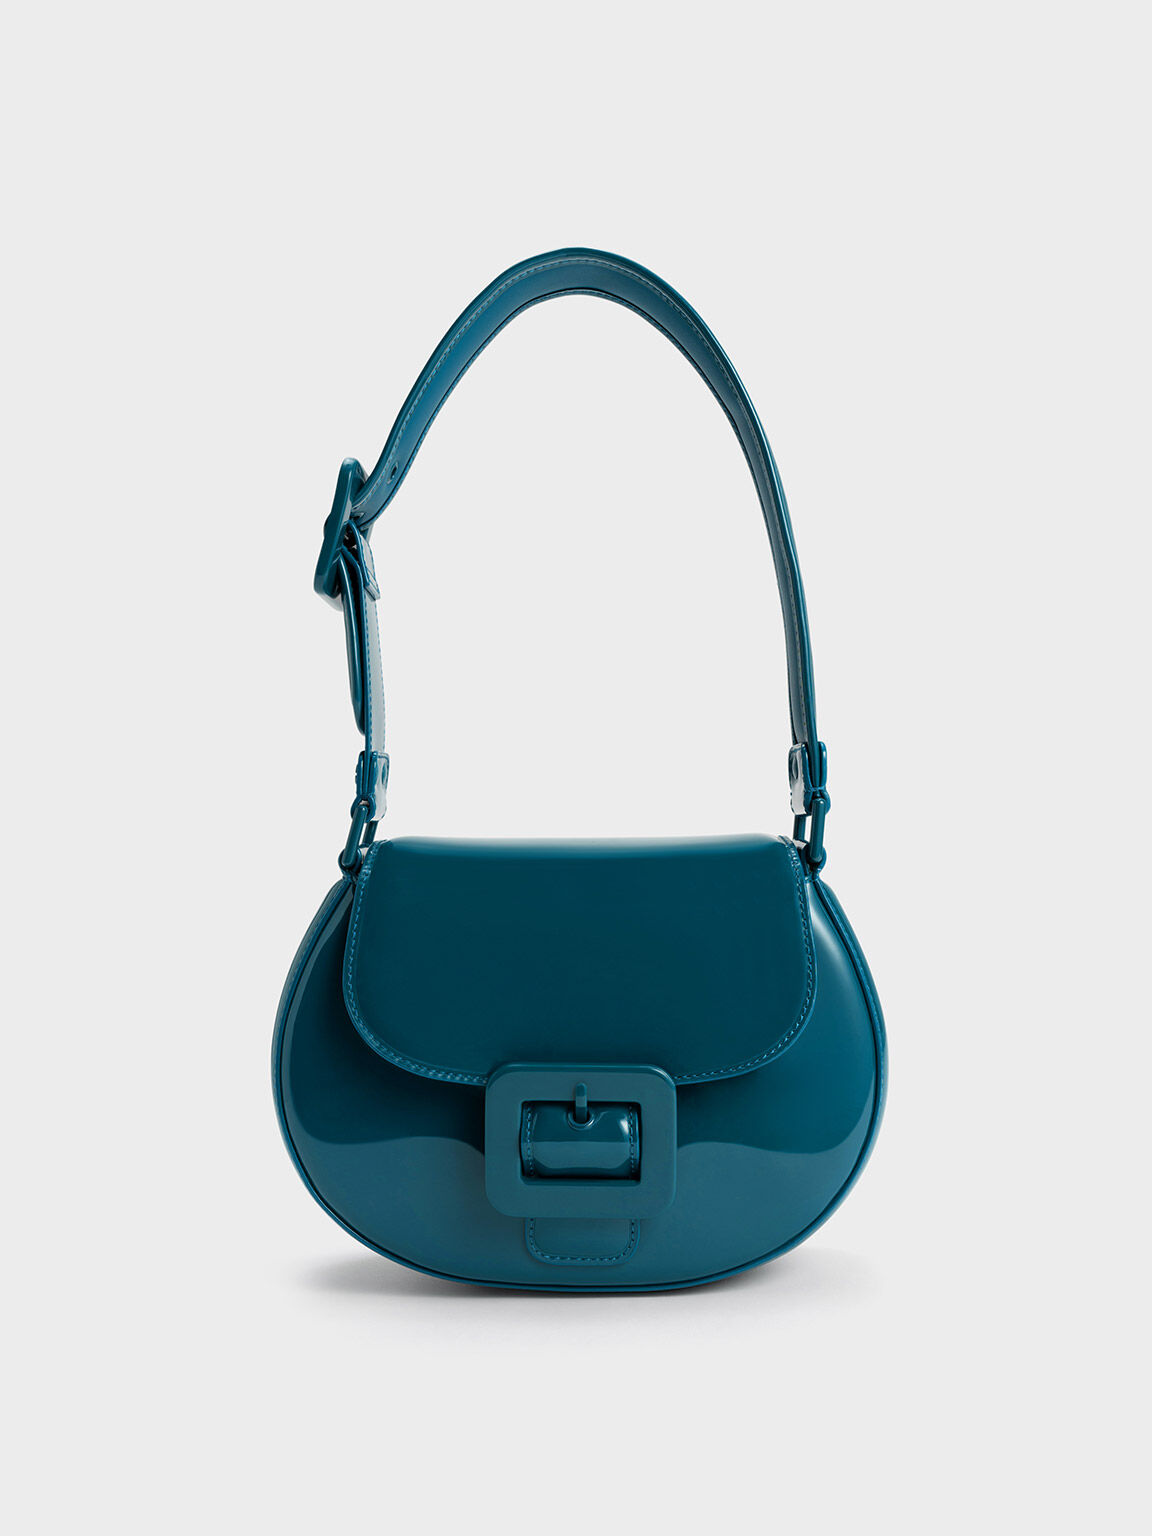 Chain Bags & Half-Moon Bags  Bag Trends 2022 - CHARLES & KEITH US